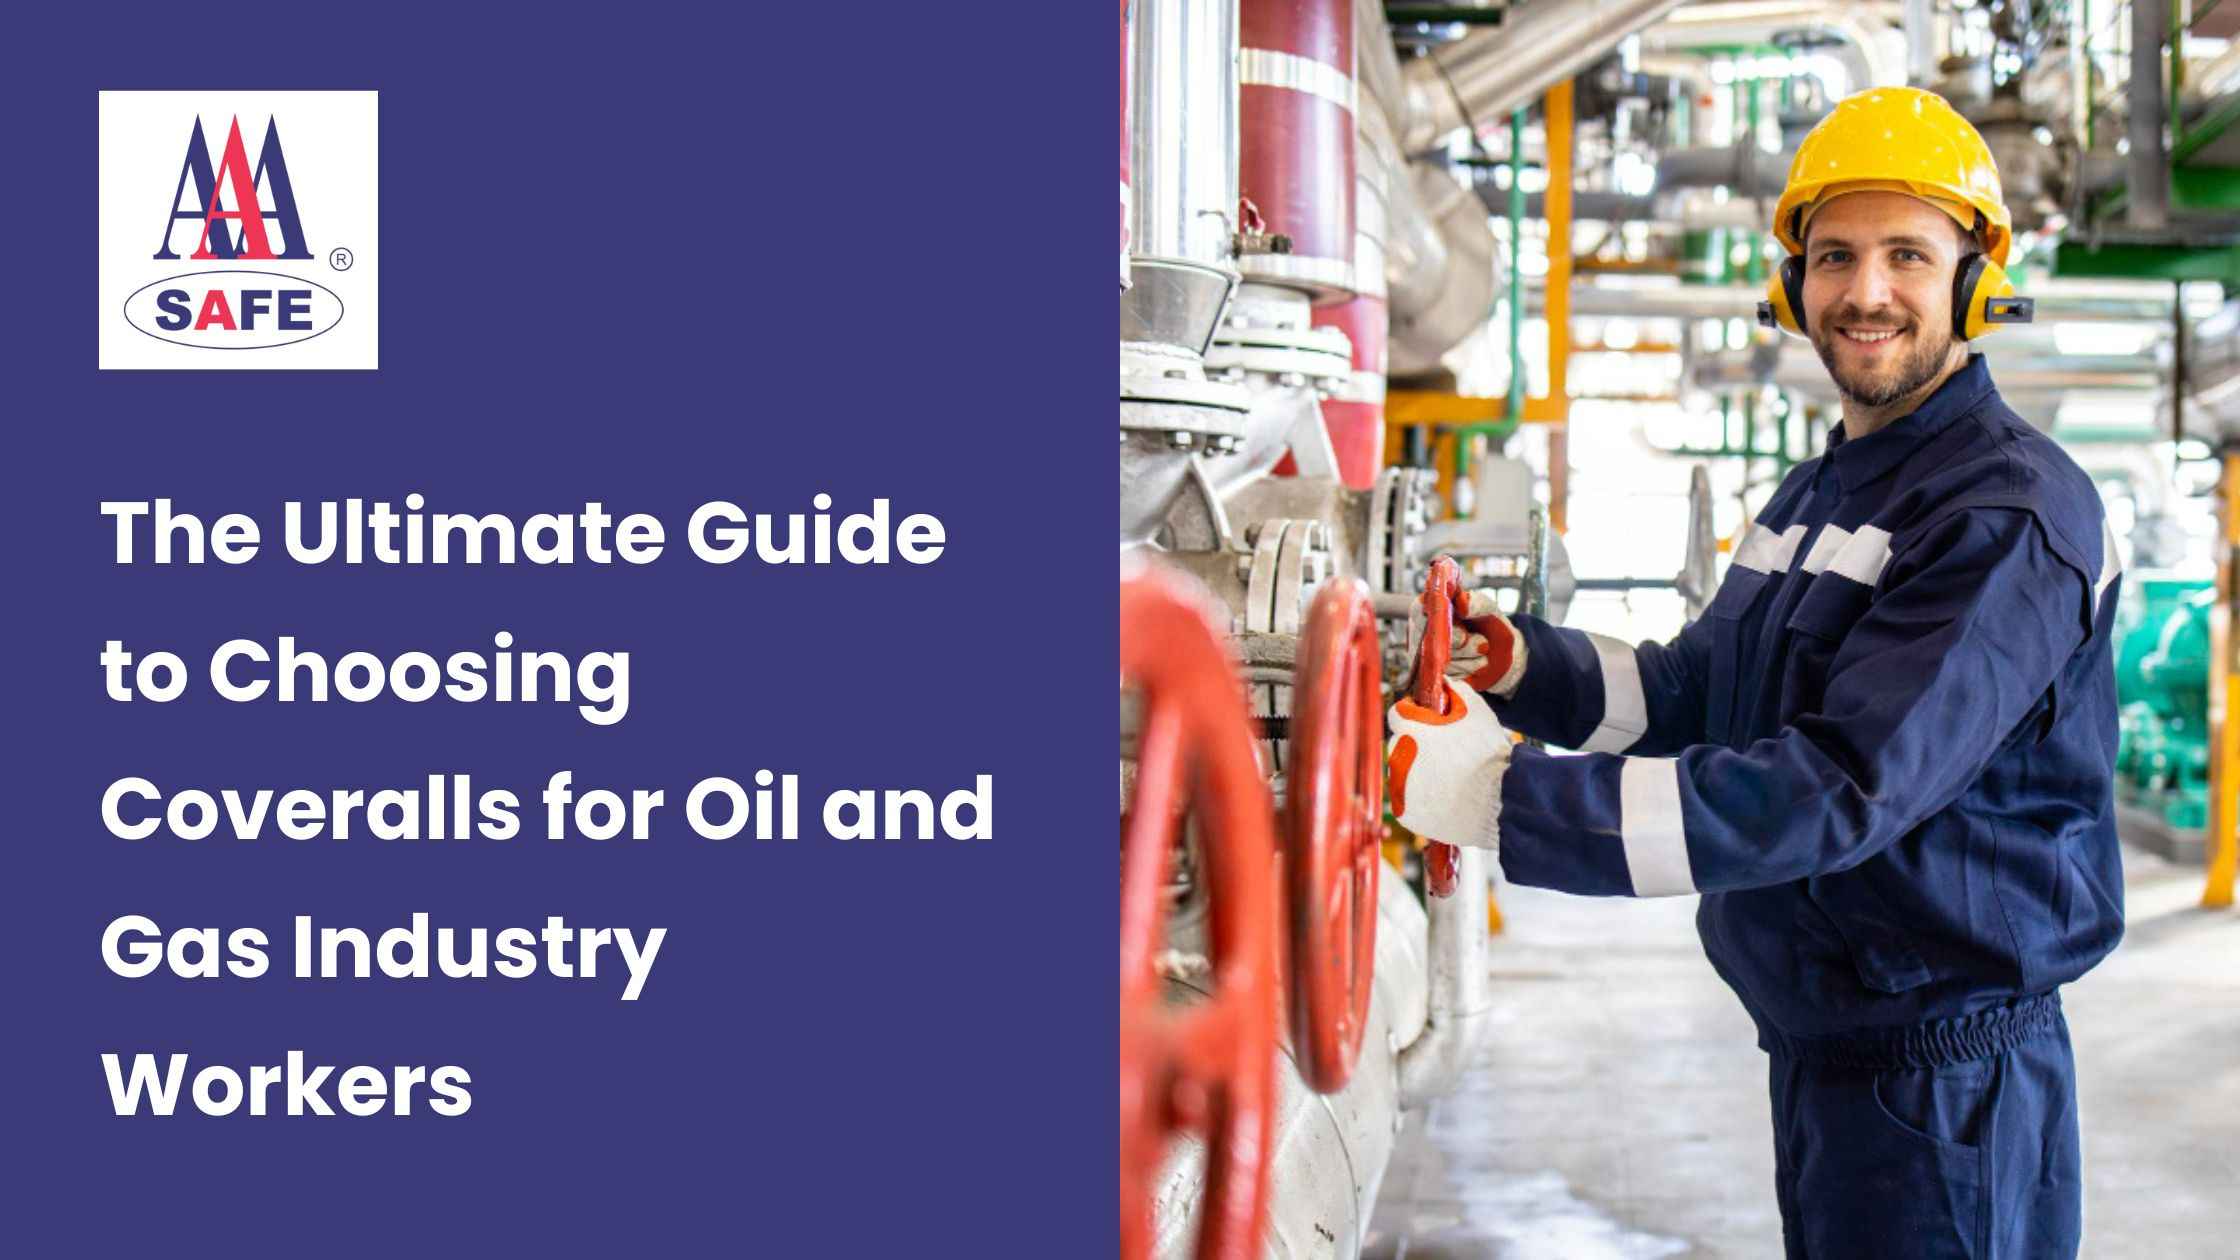 The Ultimate Guide to Choosing Coveralls for Oil and Gas Industry Workers